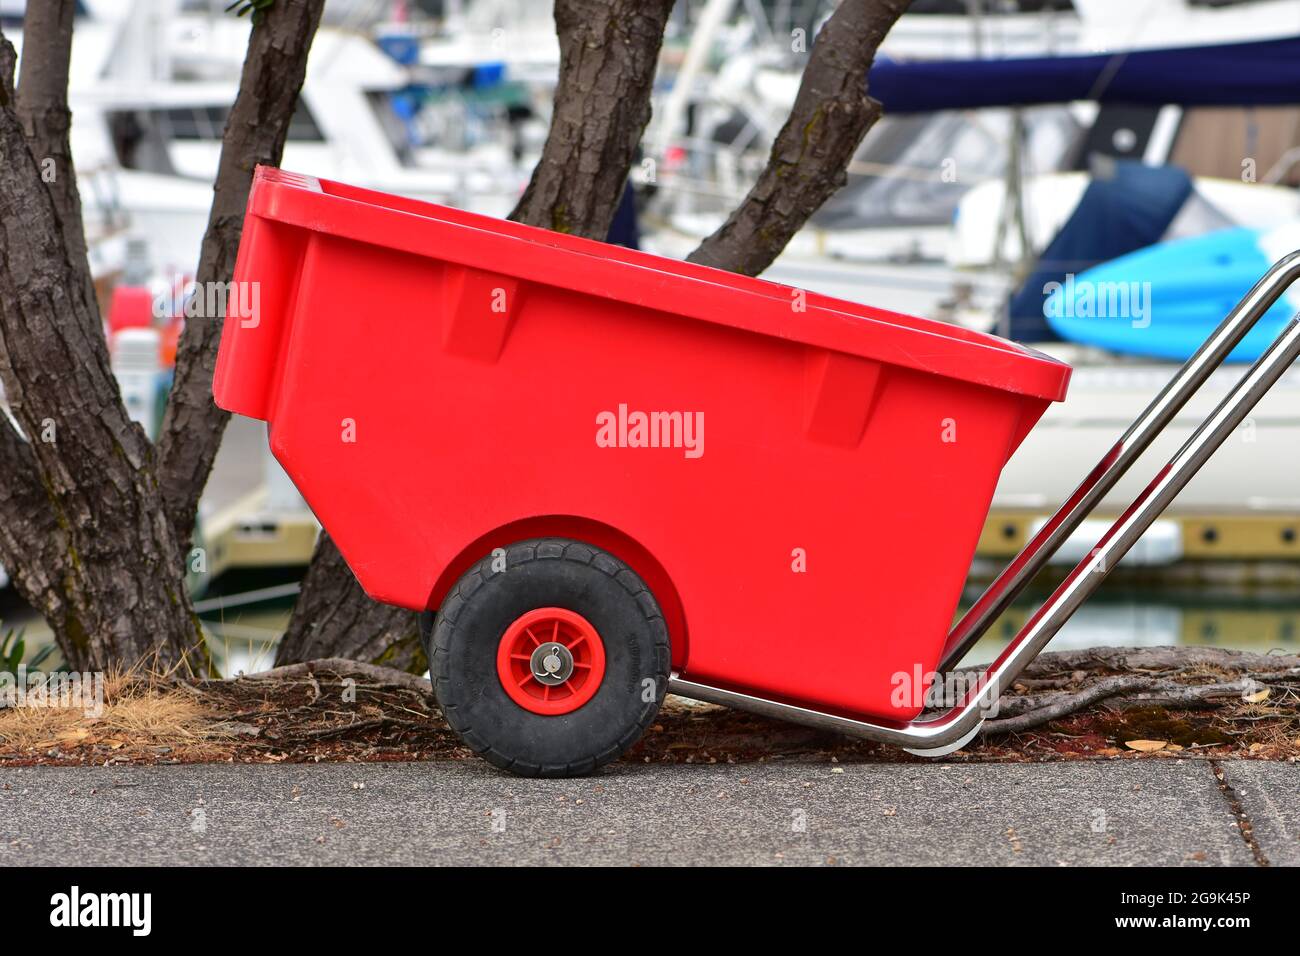 Heavy duty marina cart with stainless steel frame and red plastic basket. Stock Photo